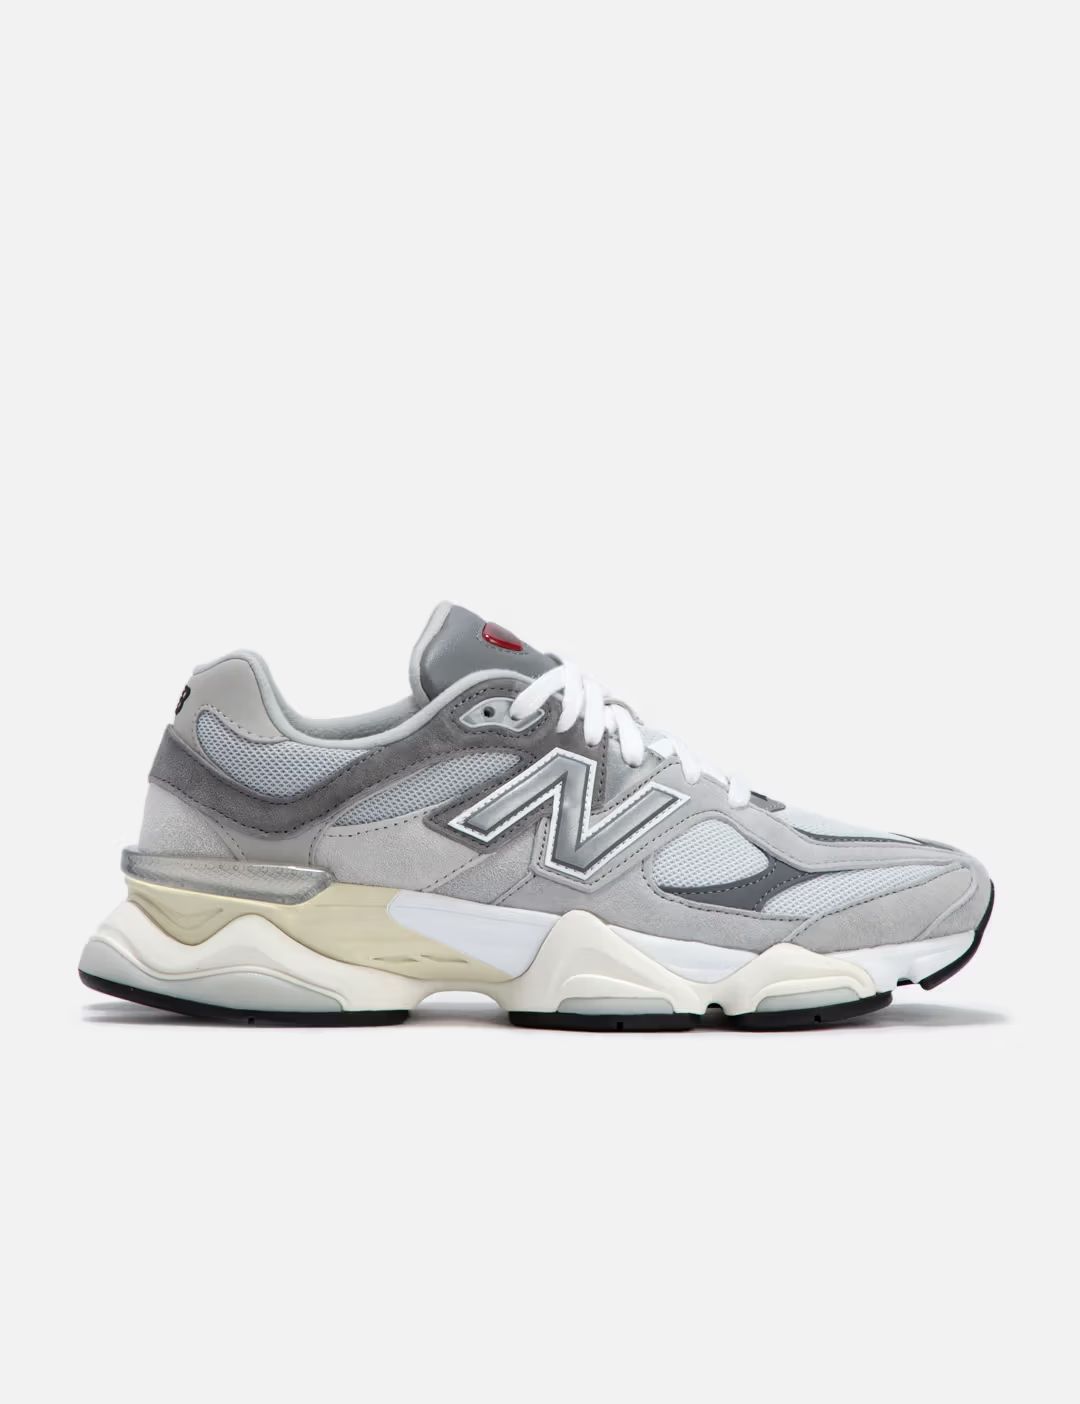 New Balance - 9060 | HBX - Globally Curated Fashion and Lifestyle by Hypebeast | Hypebeast